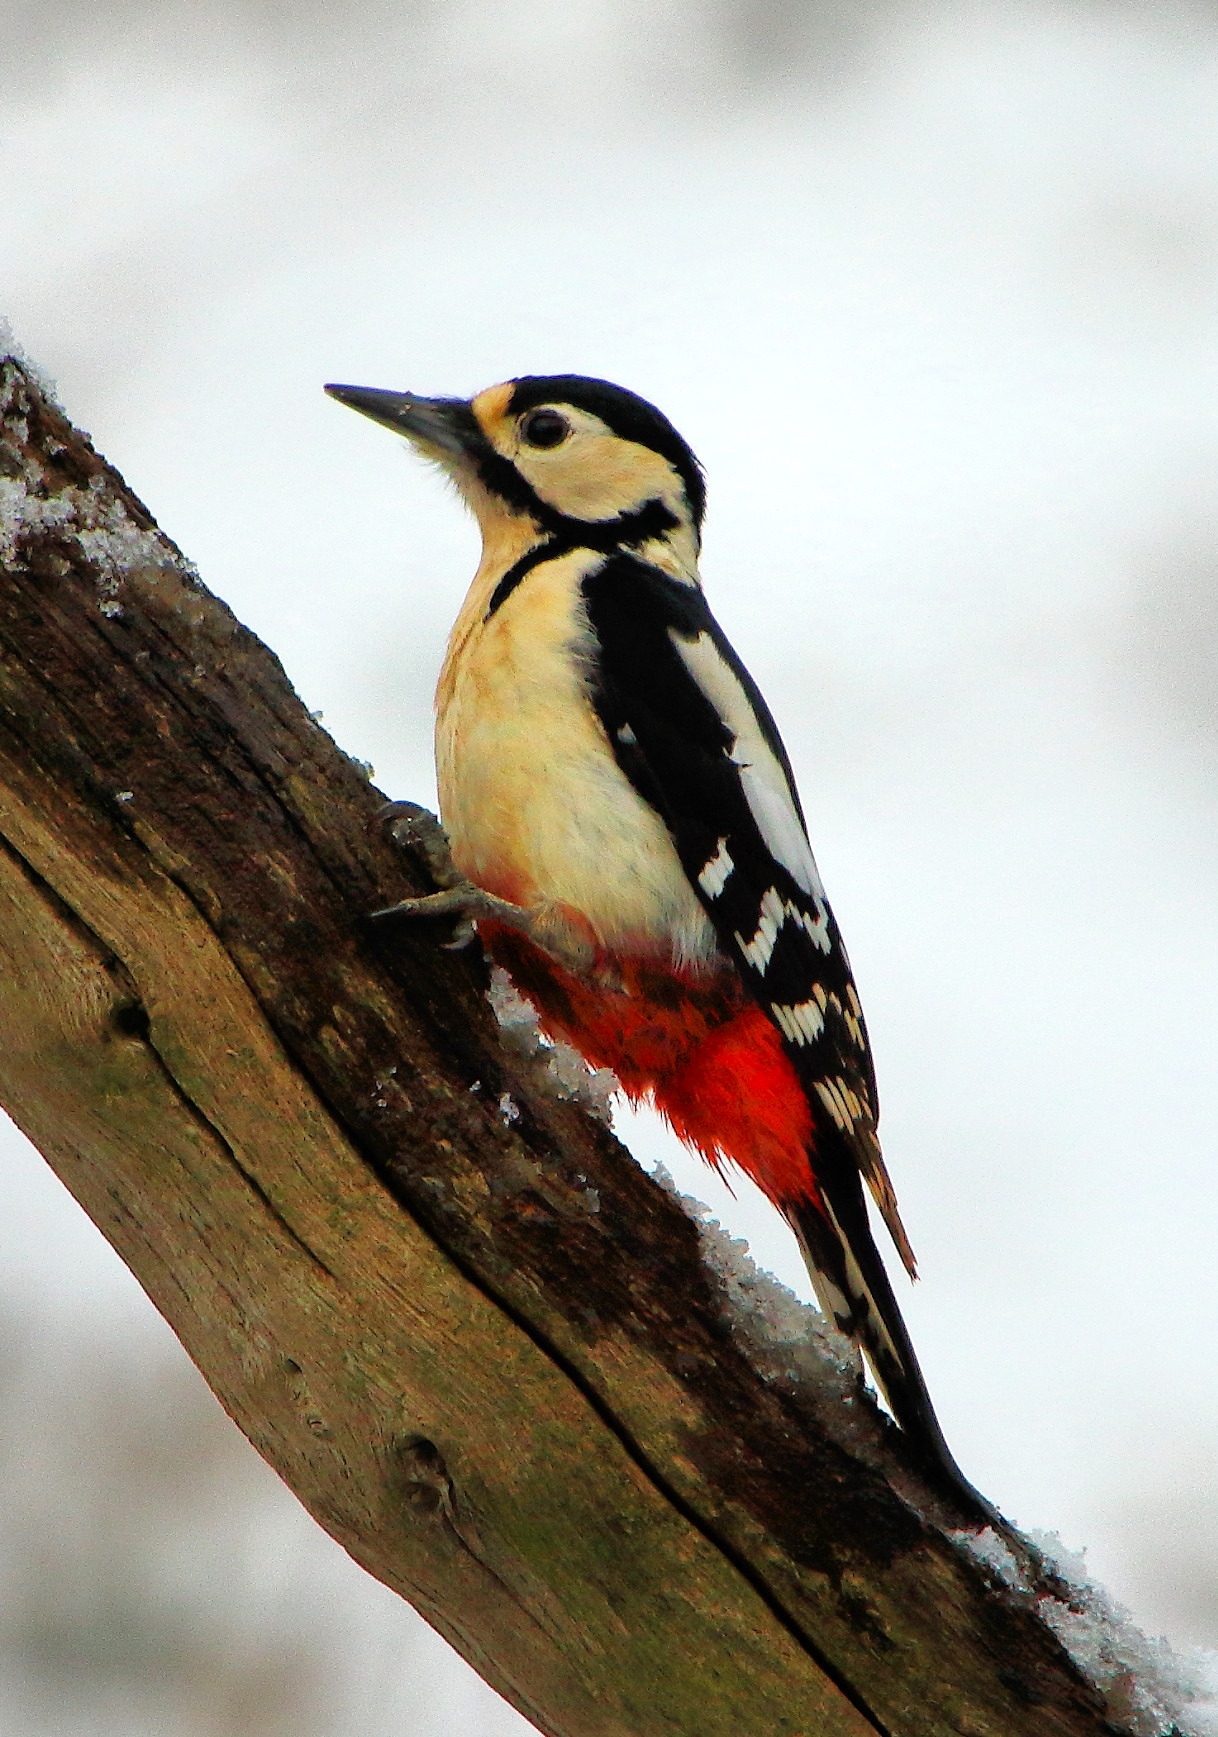 Great spotted woodpecker. Credit Airwolfhound